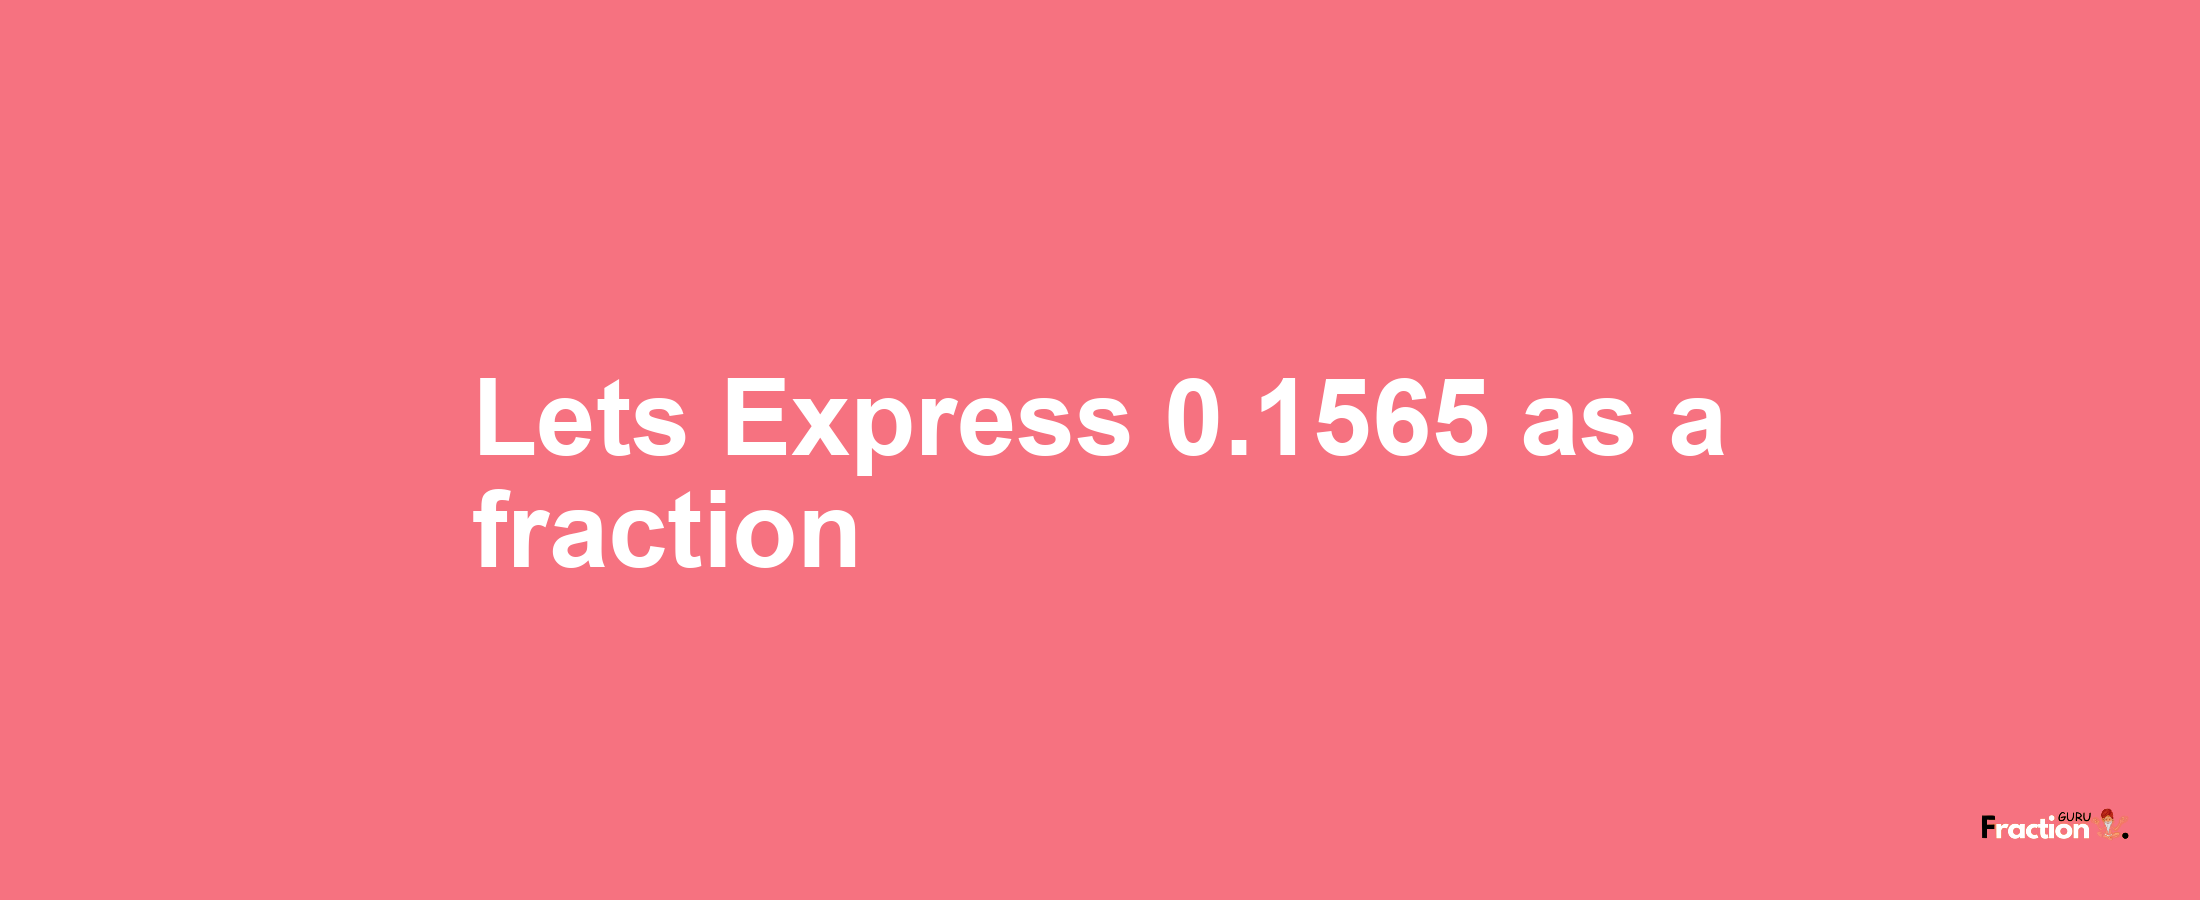 Lets Express 0.1565 as afraction